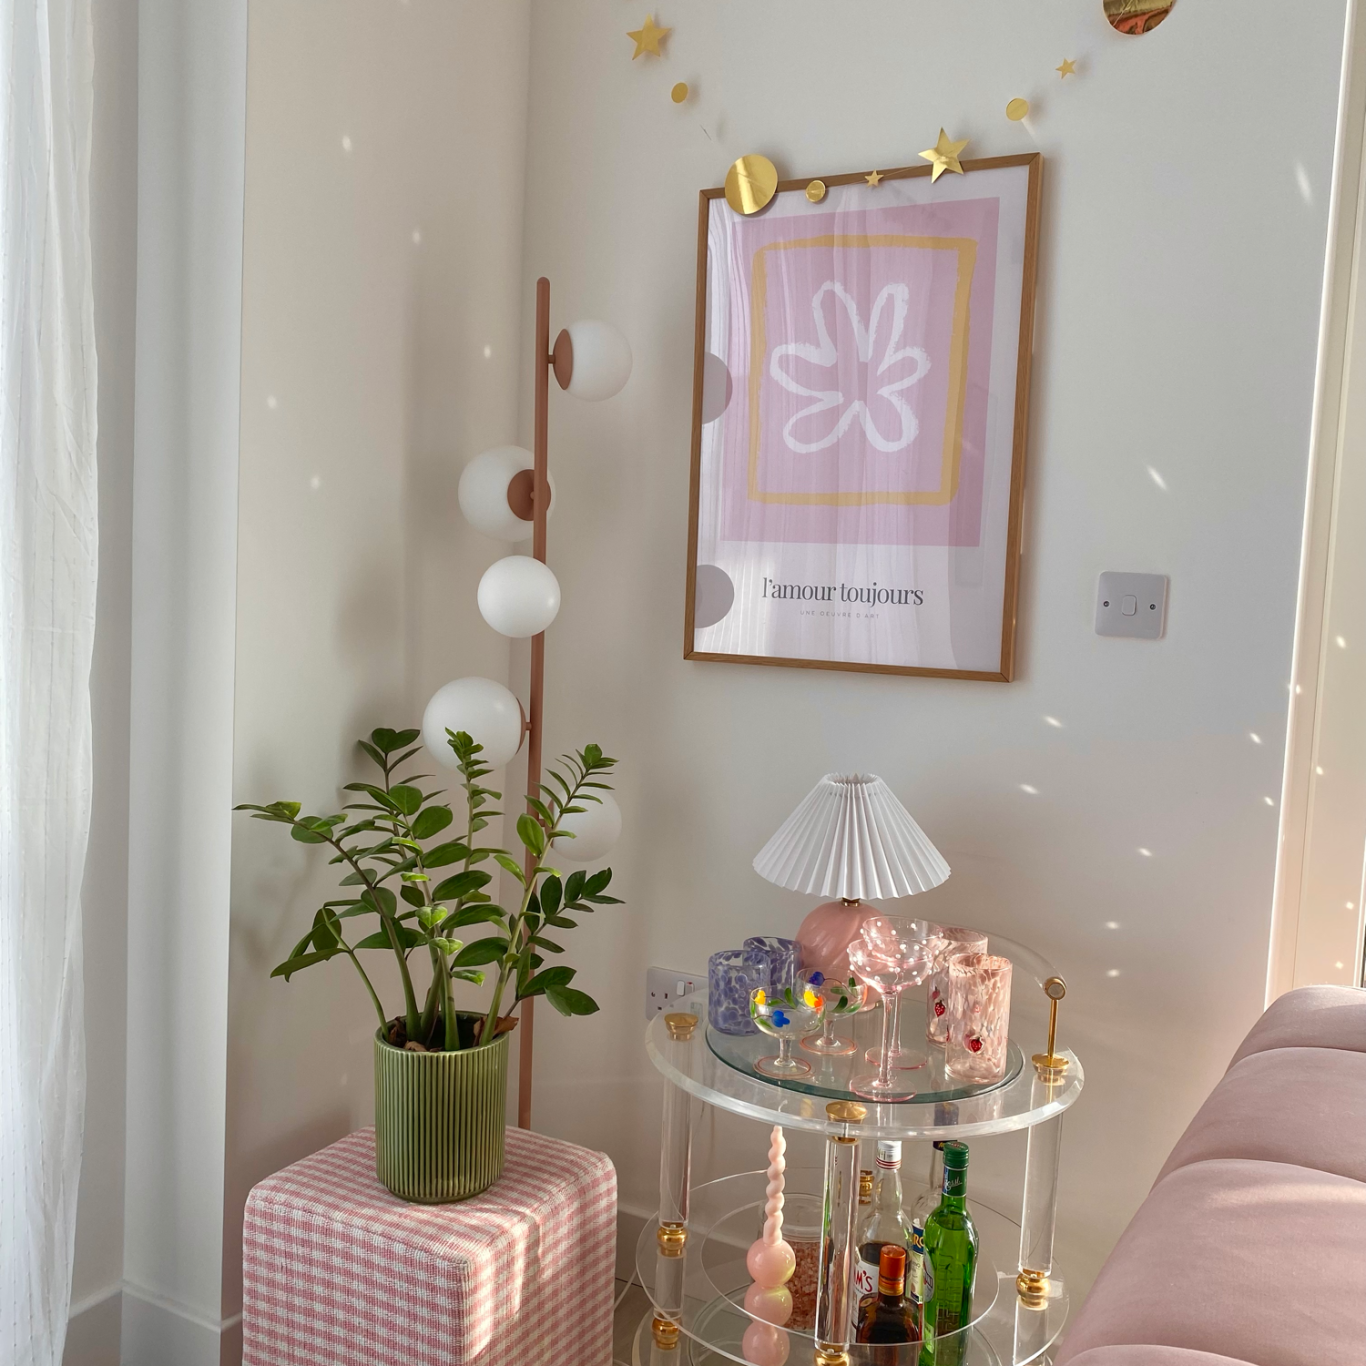 Corner of a pastel-inspired apartment that features a mini bar cart and plant placed on a gingham stool.